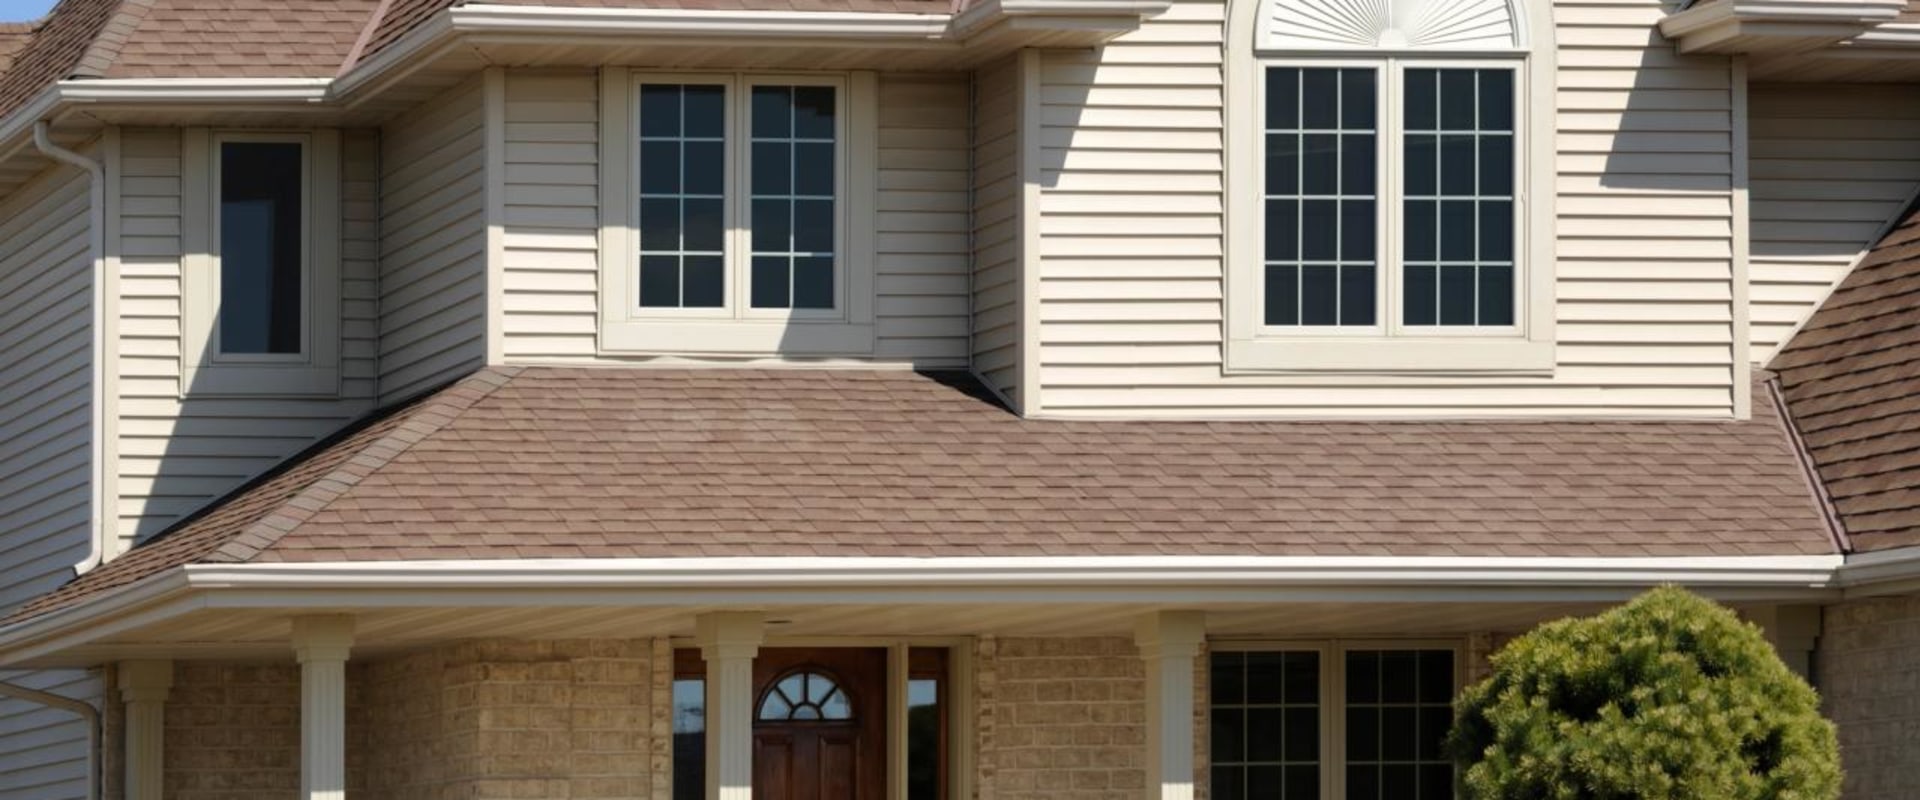 What is the most common type of residential roofing?